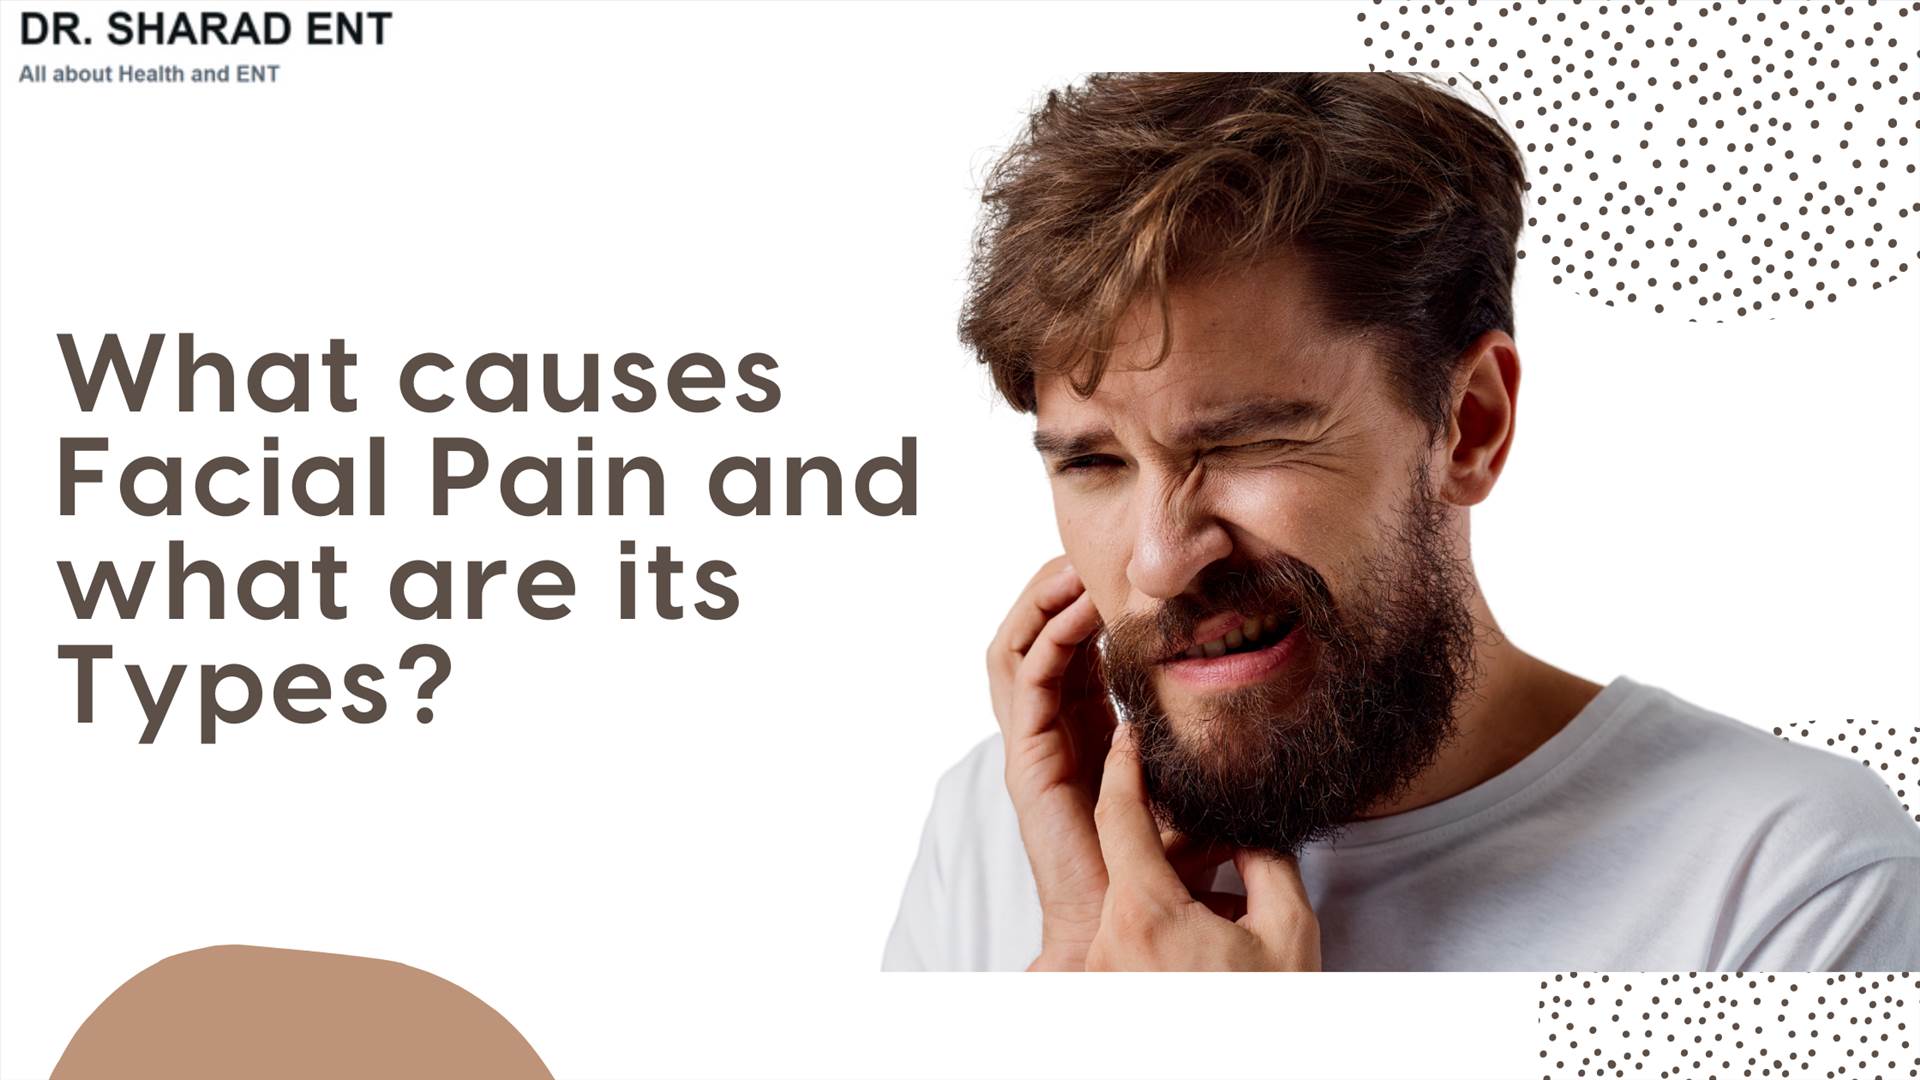 What causes Facial Pain and what are its Types.png Facial pain can be a real discomfort! Let's dive into what causes facial pain and its various types. https://www.drsharadent.com/what-causes-facial-pain-and-what-are-its-types/
 by Dr Sharad